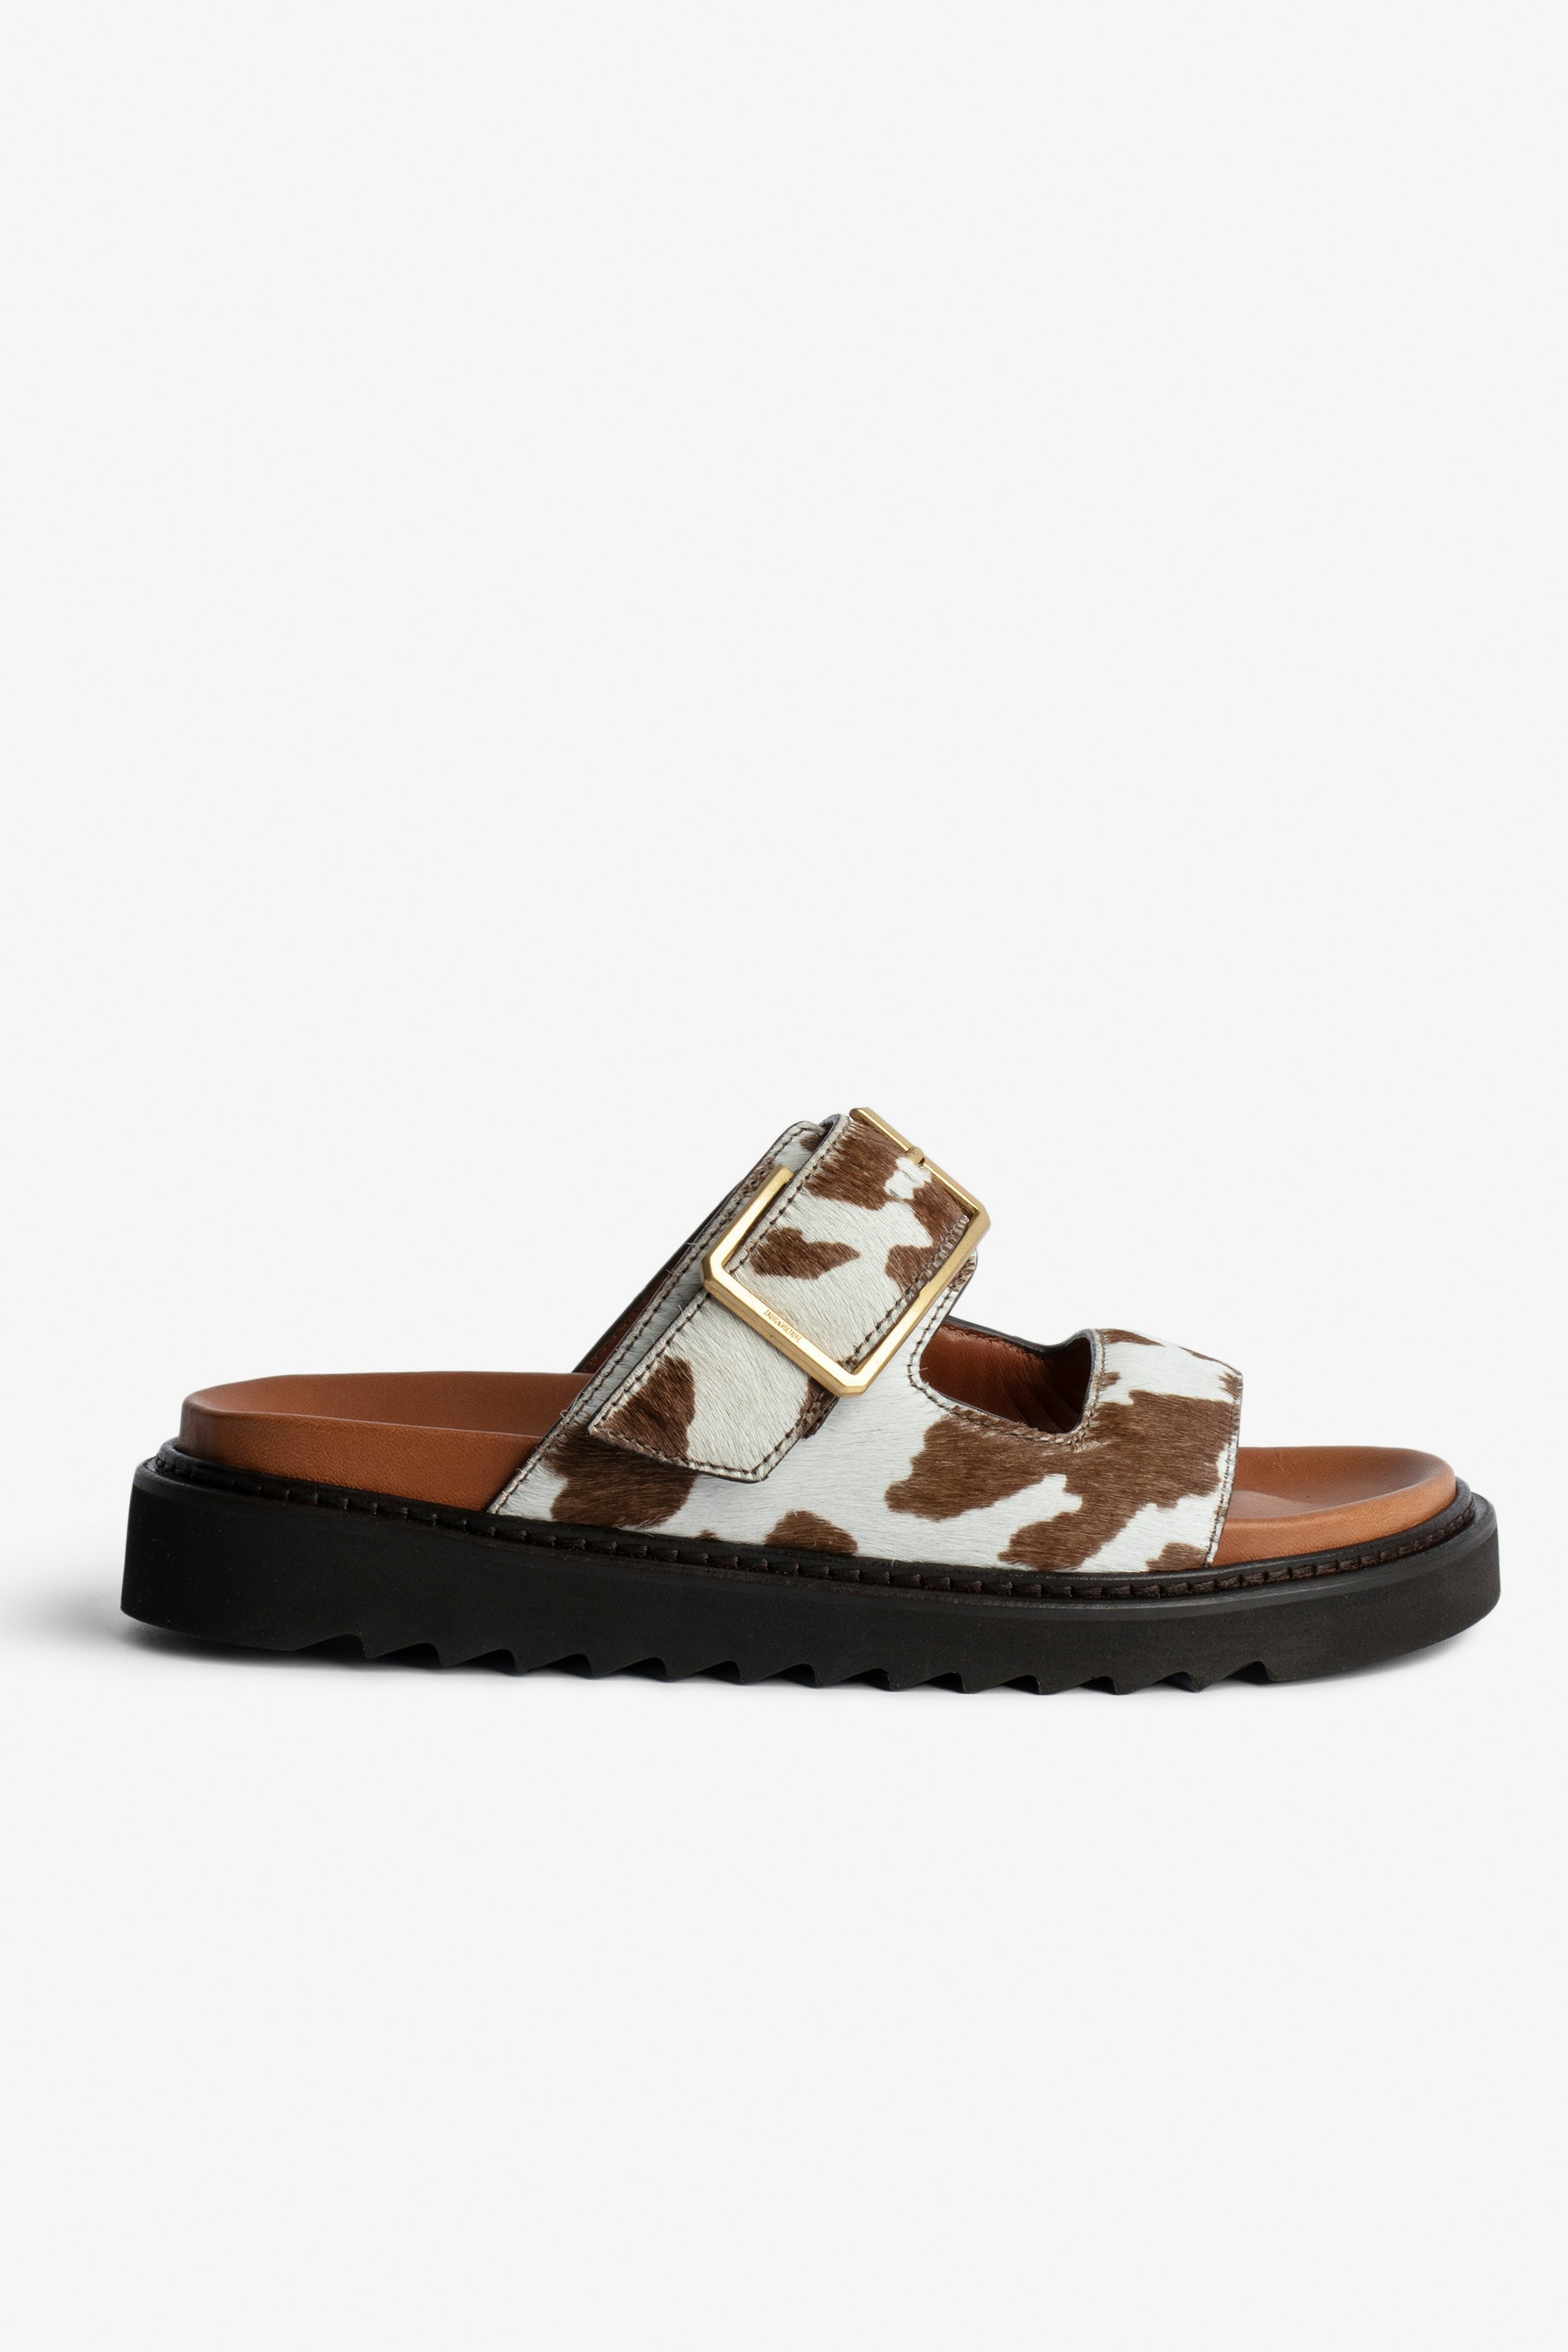 Cecilia Alpha Sandals Women's brown and white leather sandals with pony-effect strap and C-shaped buckle